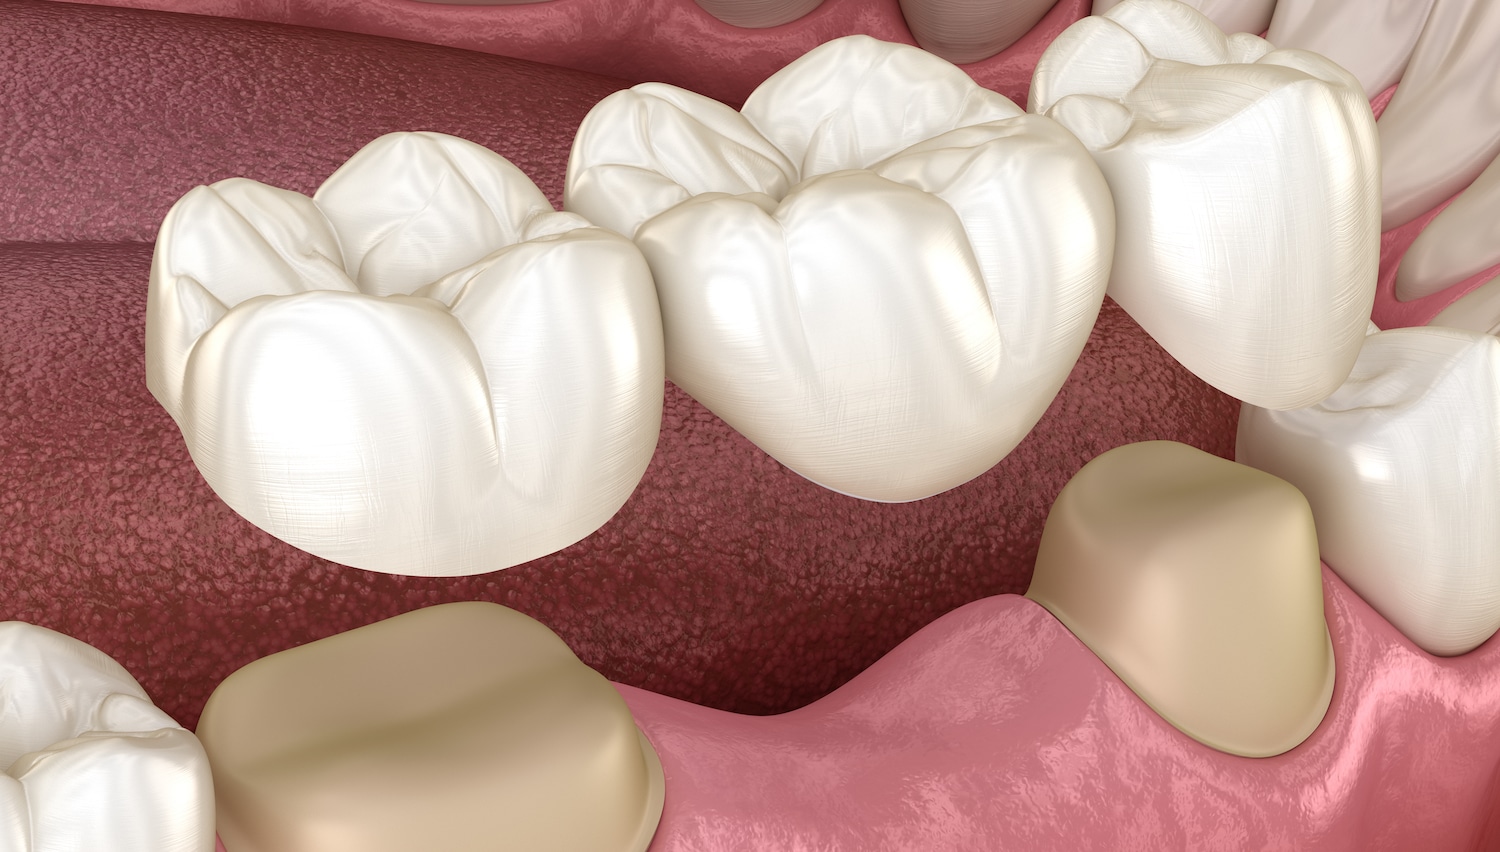 The Life-Changing Impact Of Reconstructive Dentistry